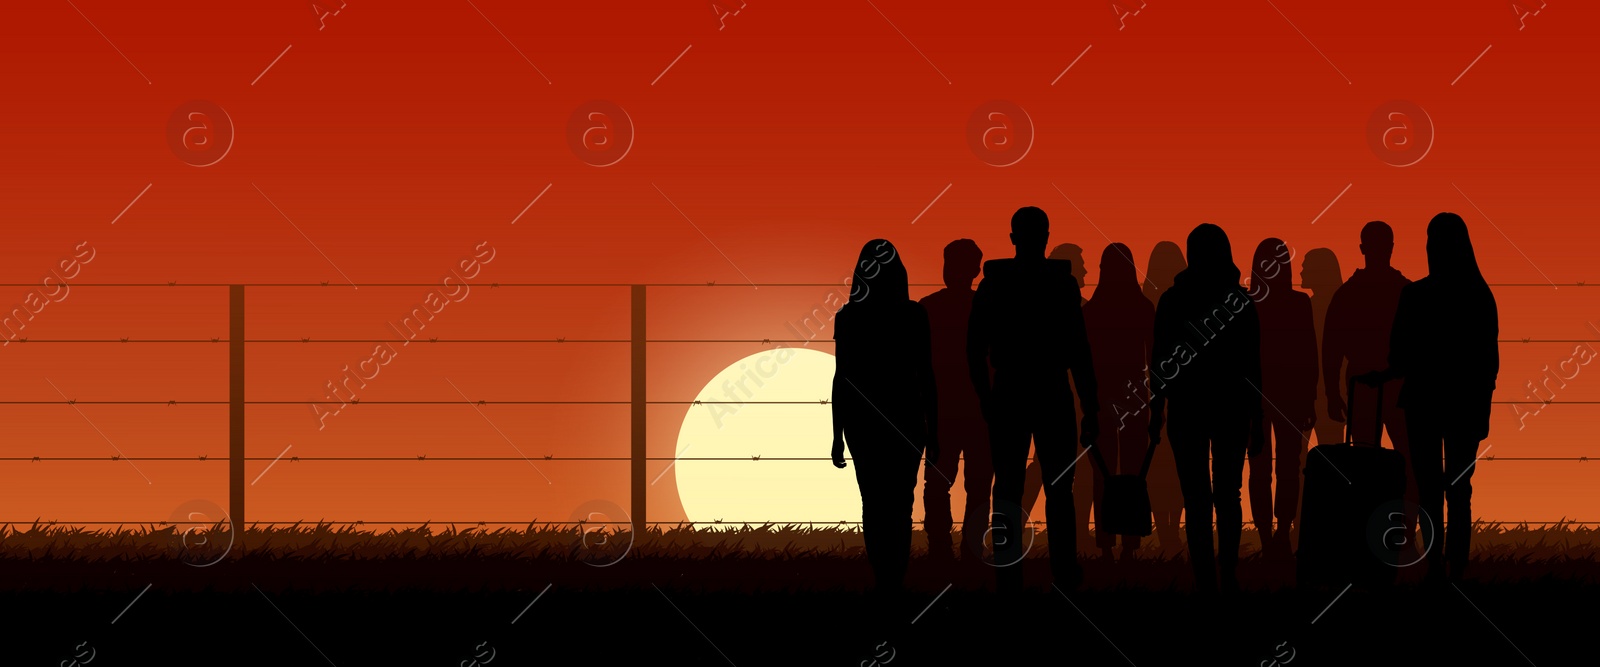 Image of Immigration. Silhouettes of people near perimeter fence with barbed wire at sunset, illustration